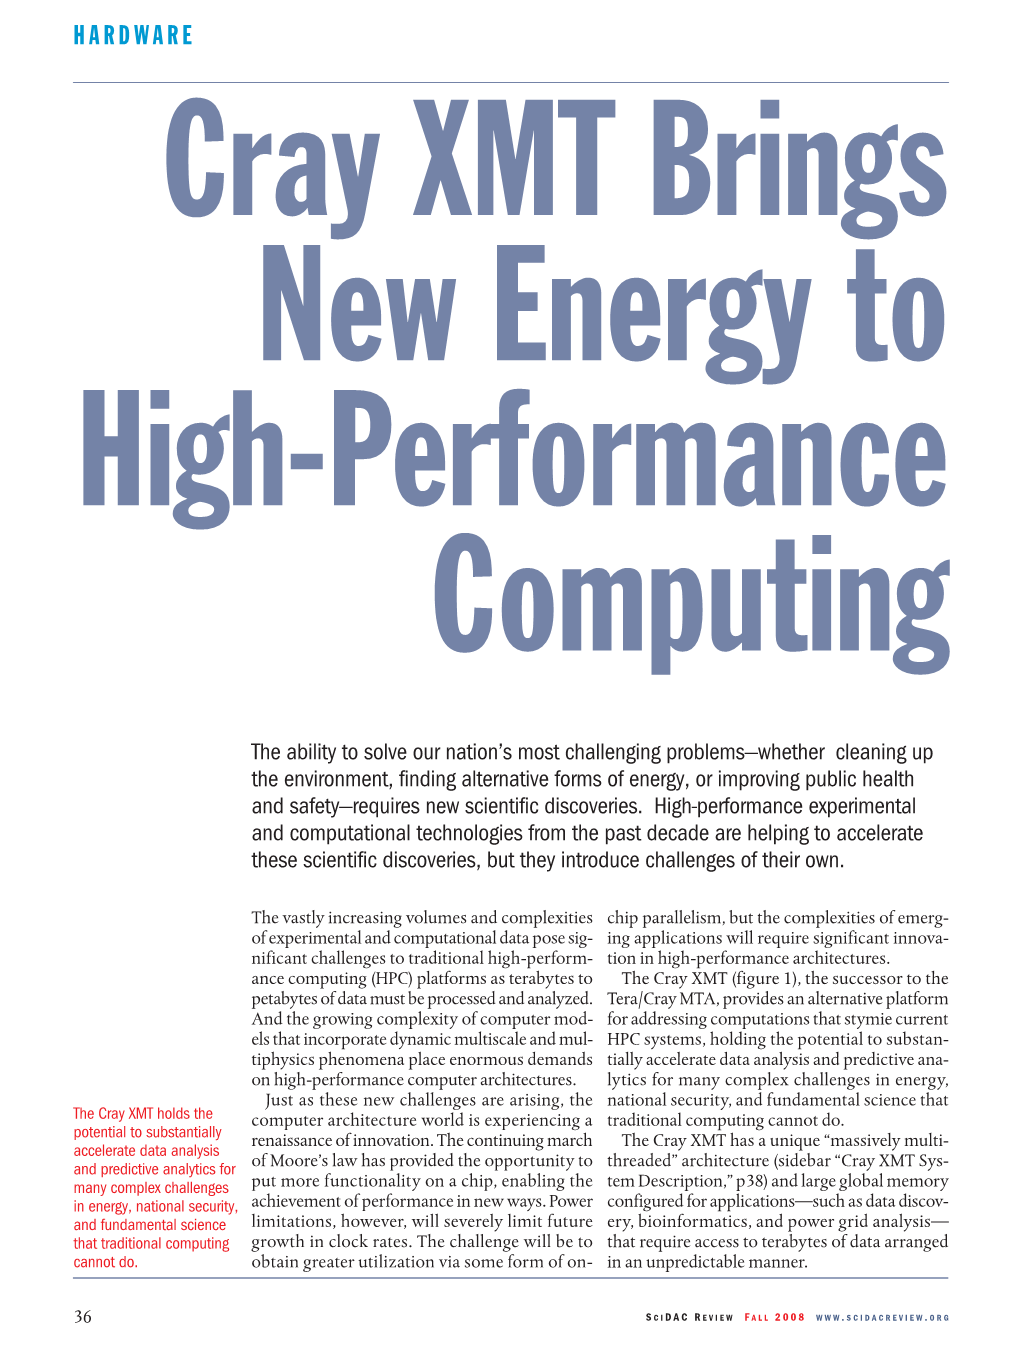 Cray XMT Brings New Energy to High-Performance Computing